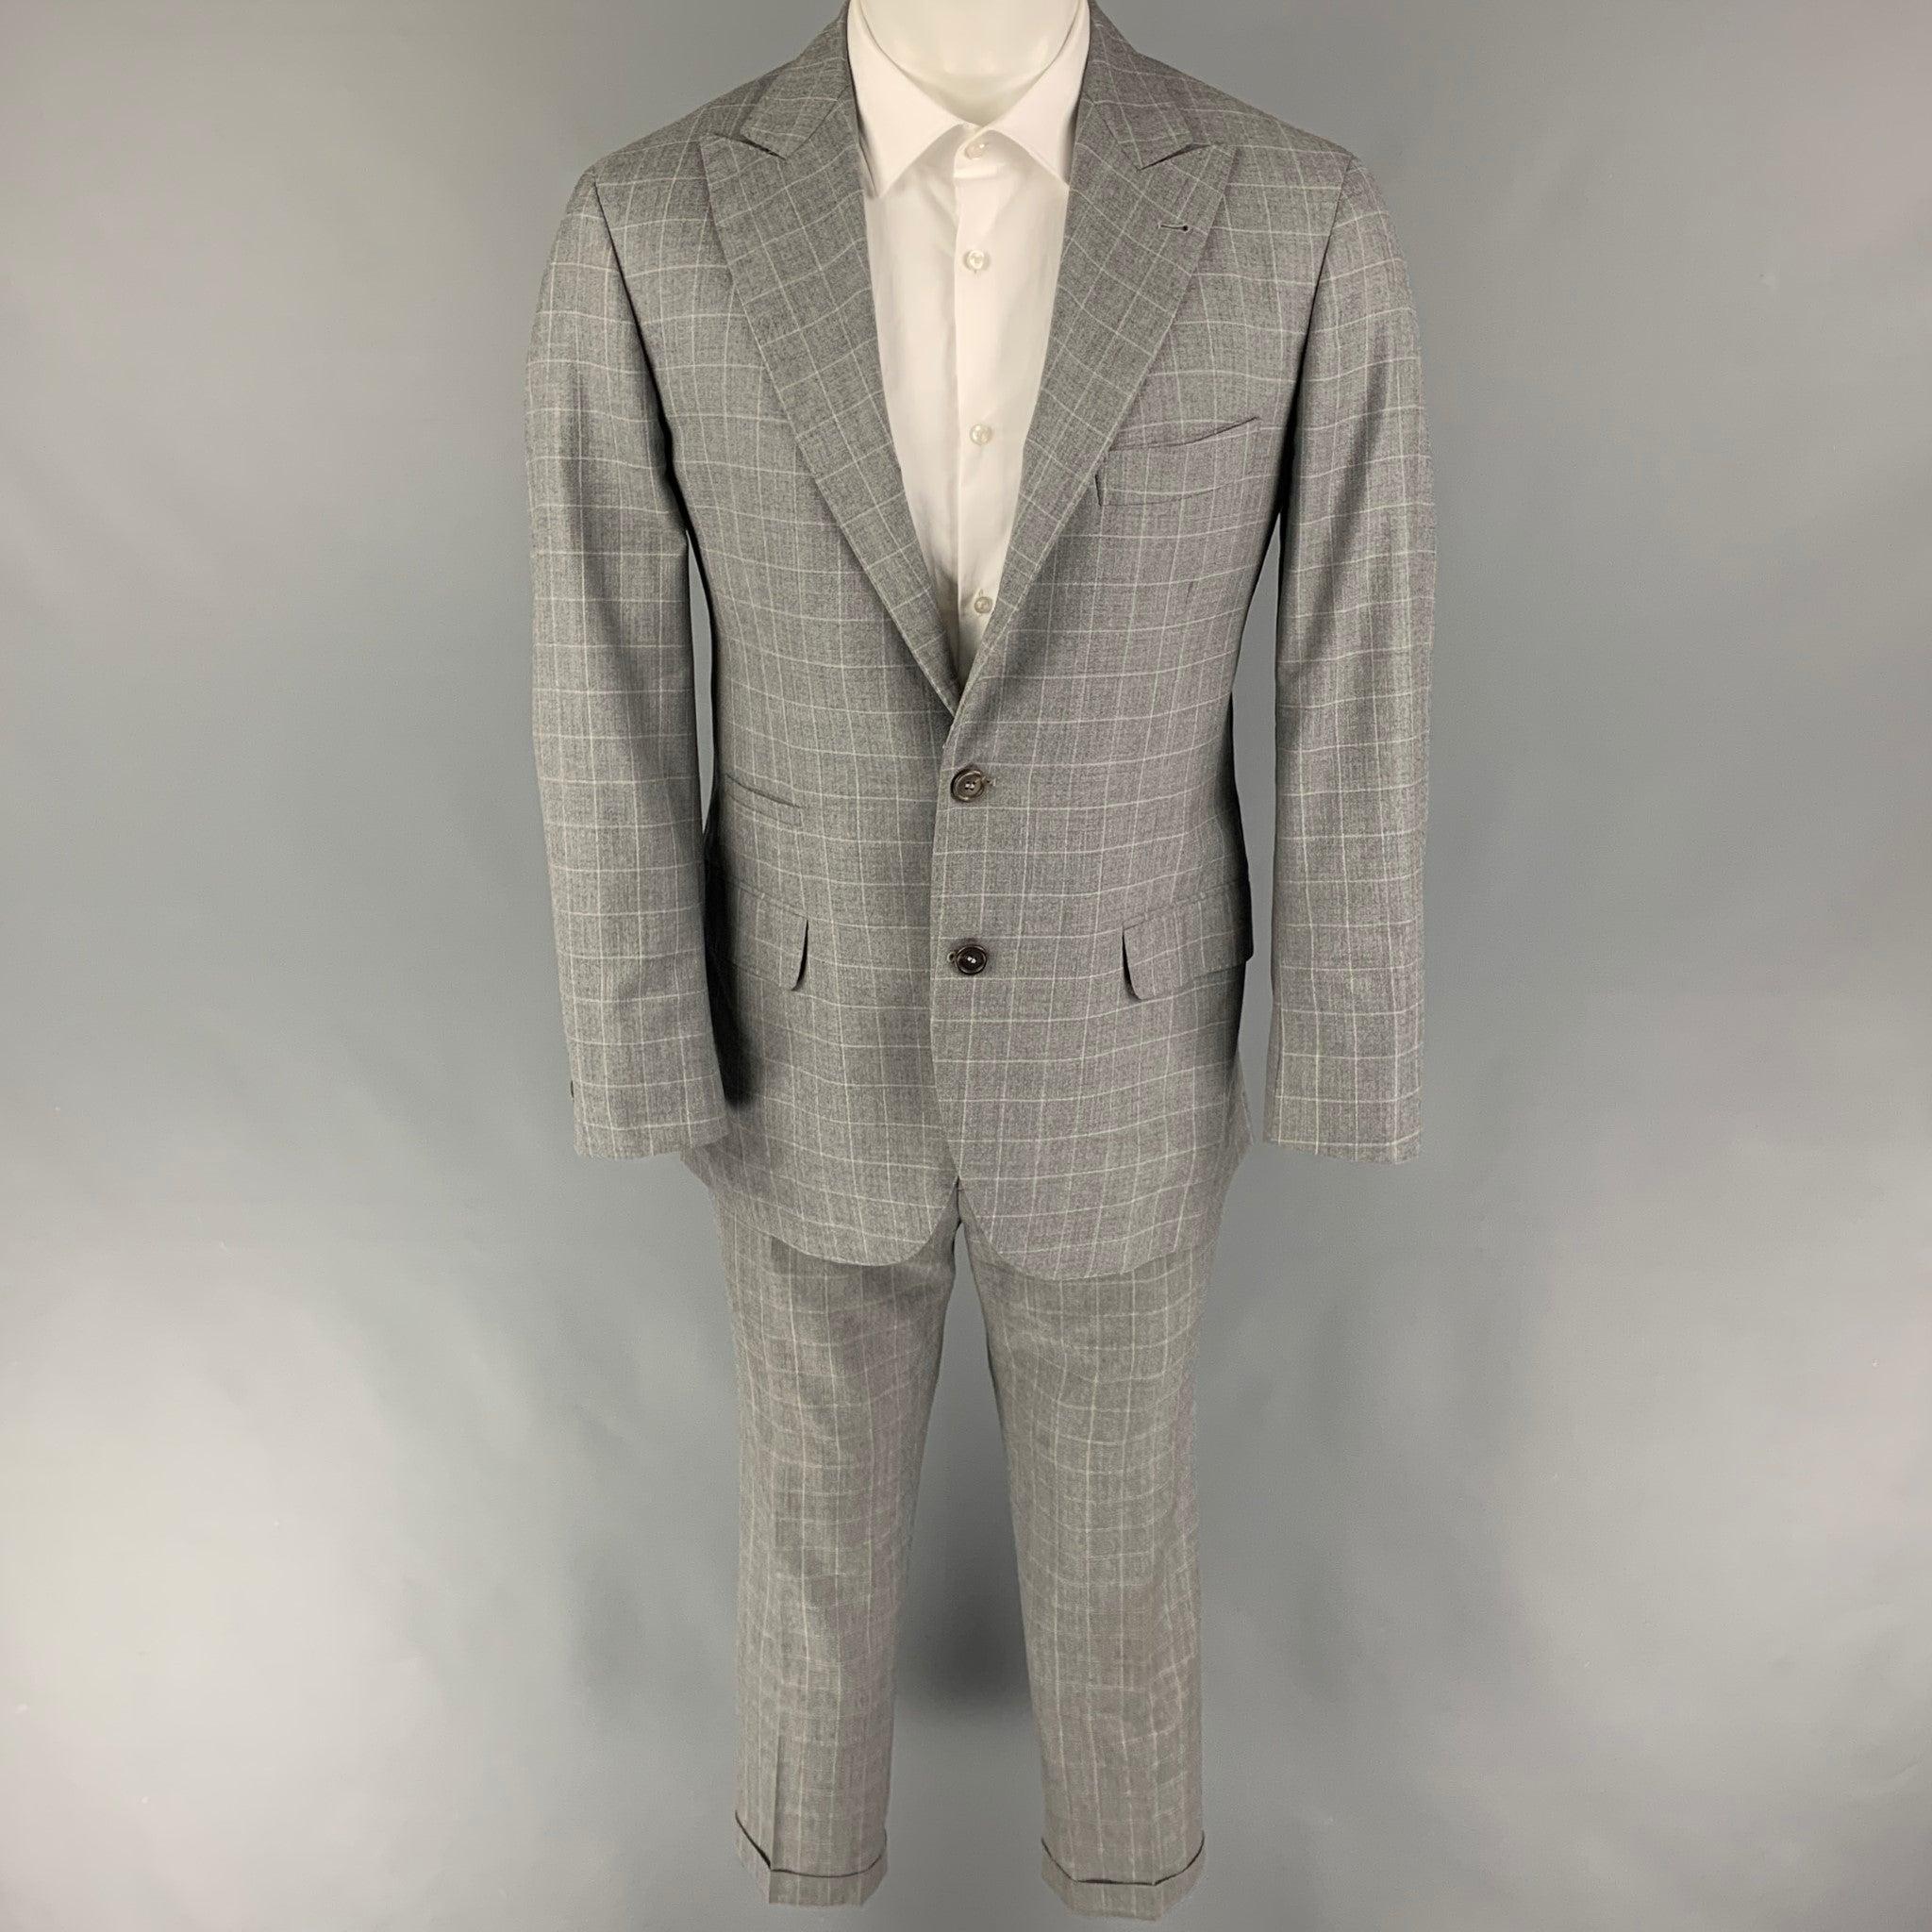 BRUNELLO CUCINELLI
suit comes in a gray window pane lane wool / silk with a half liner and includes a single breasted, three button sport coat with a peak lapel and matching flat front trousers. Includes garment bag & tags. Made in Italy. Good